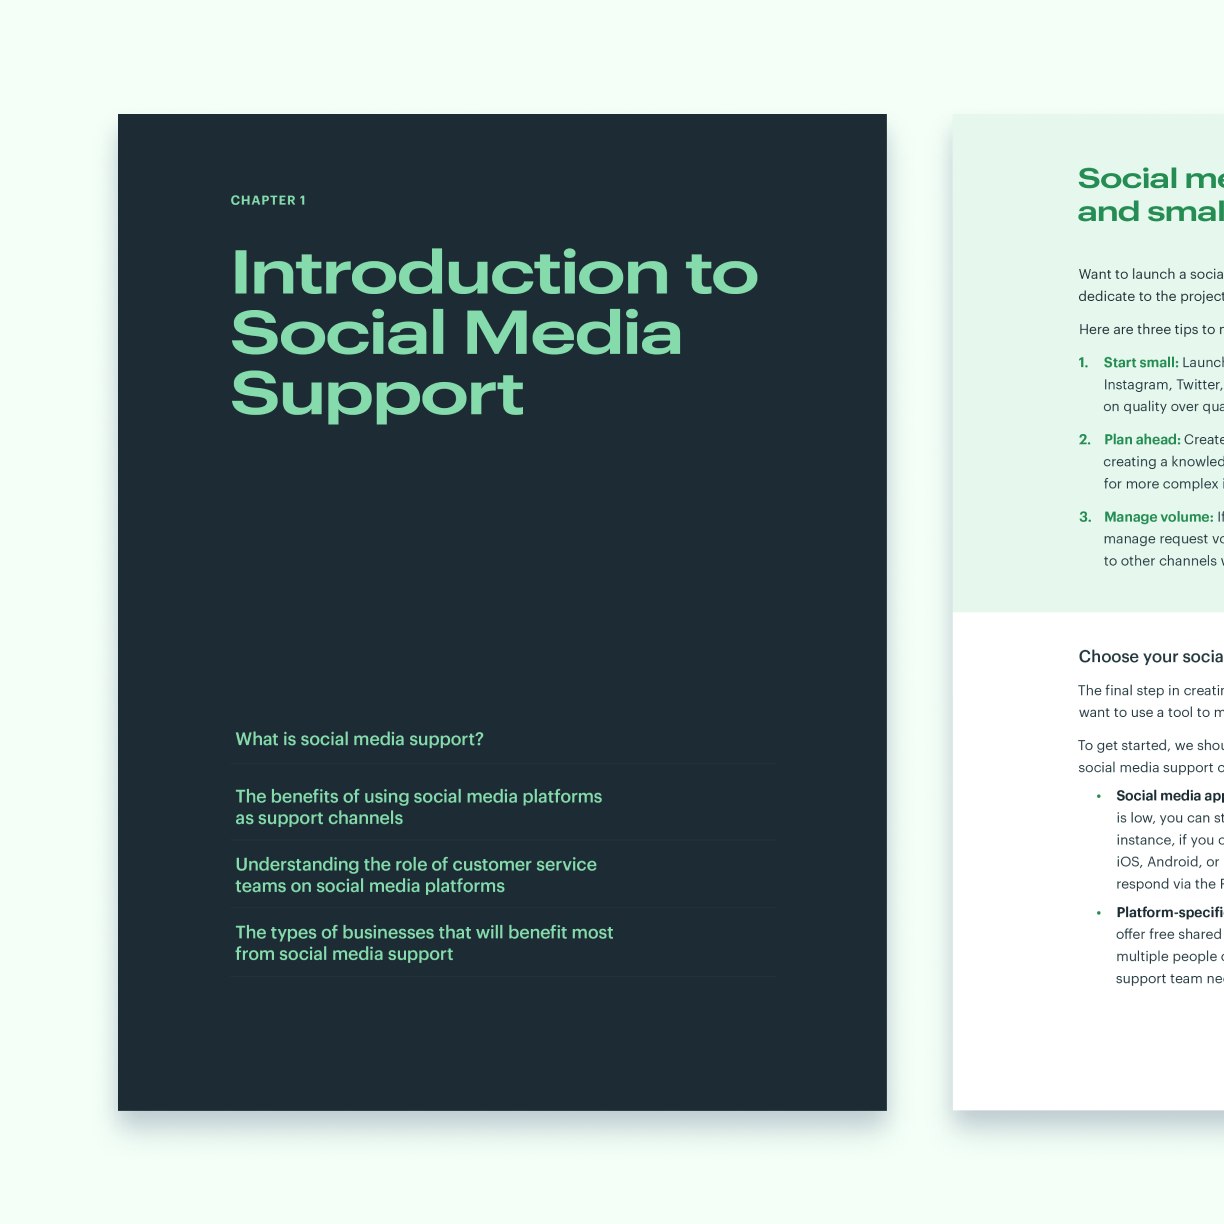 Getting Started with Social Media Support - Inside eBook